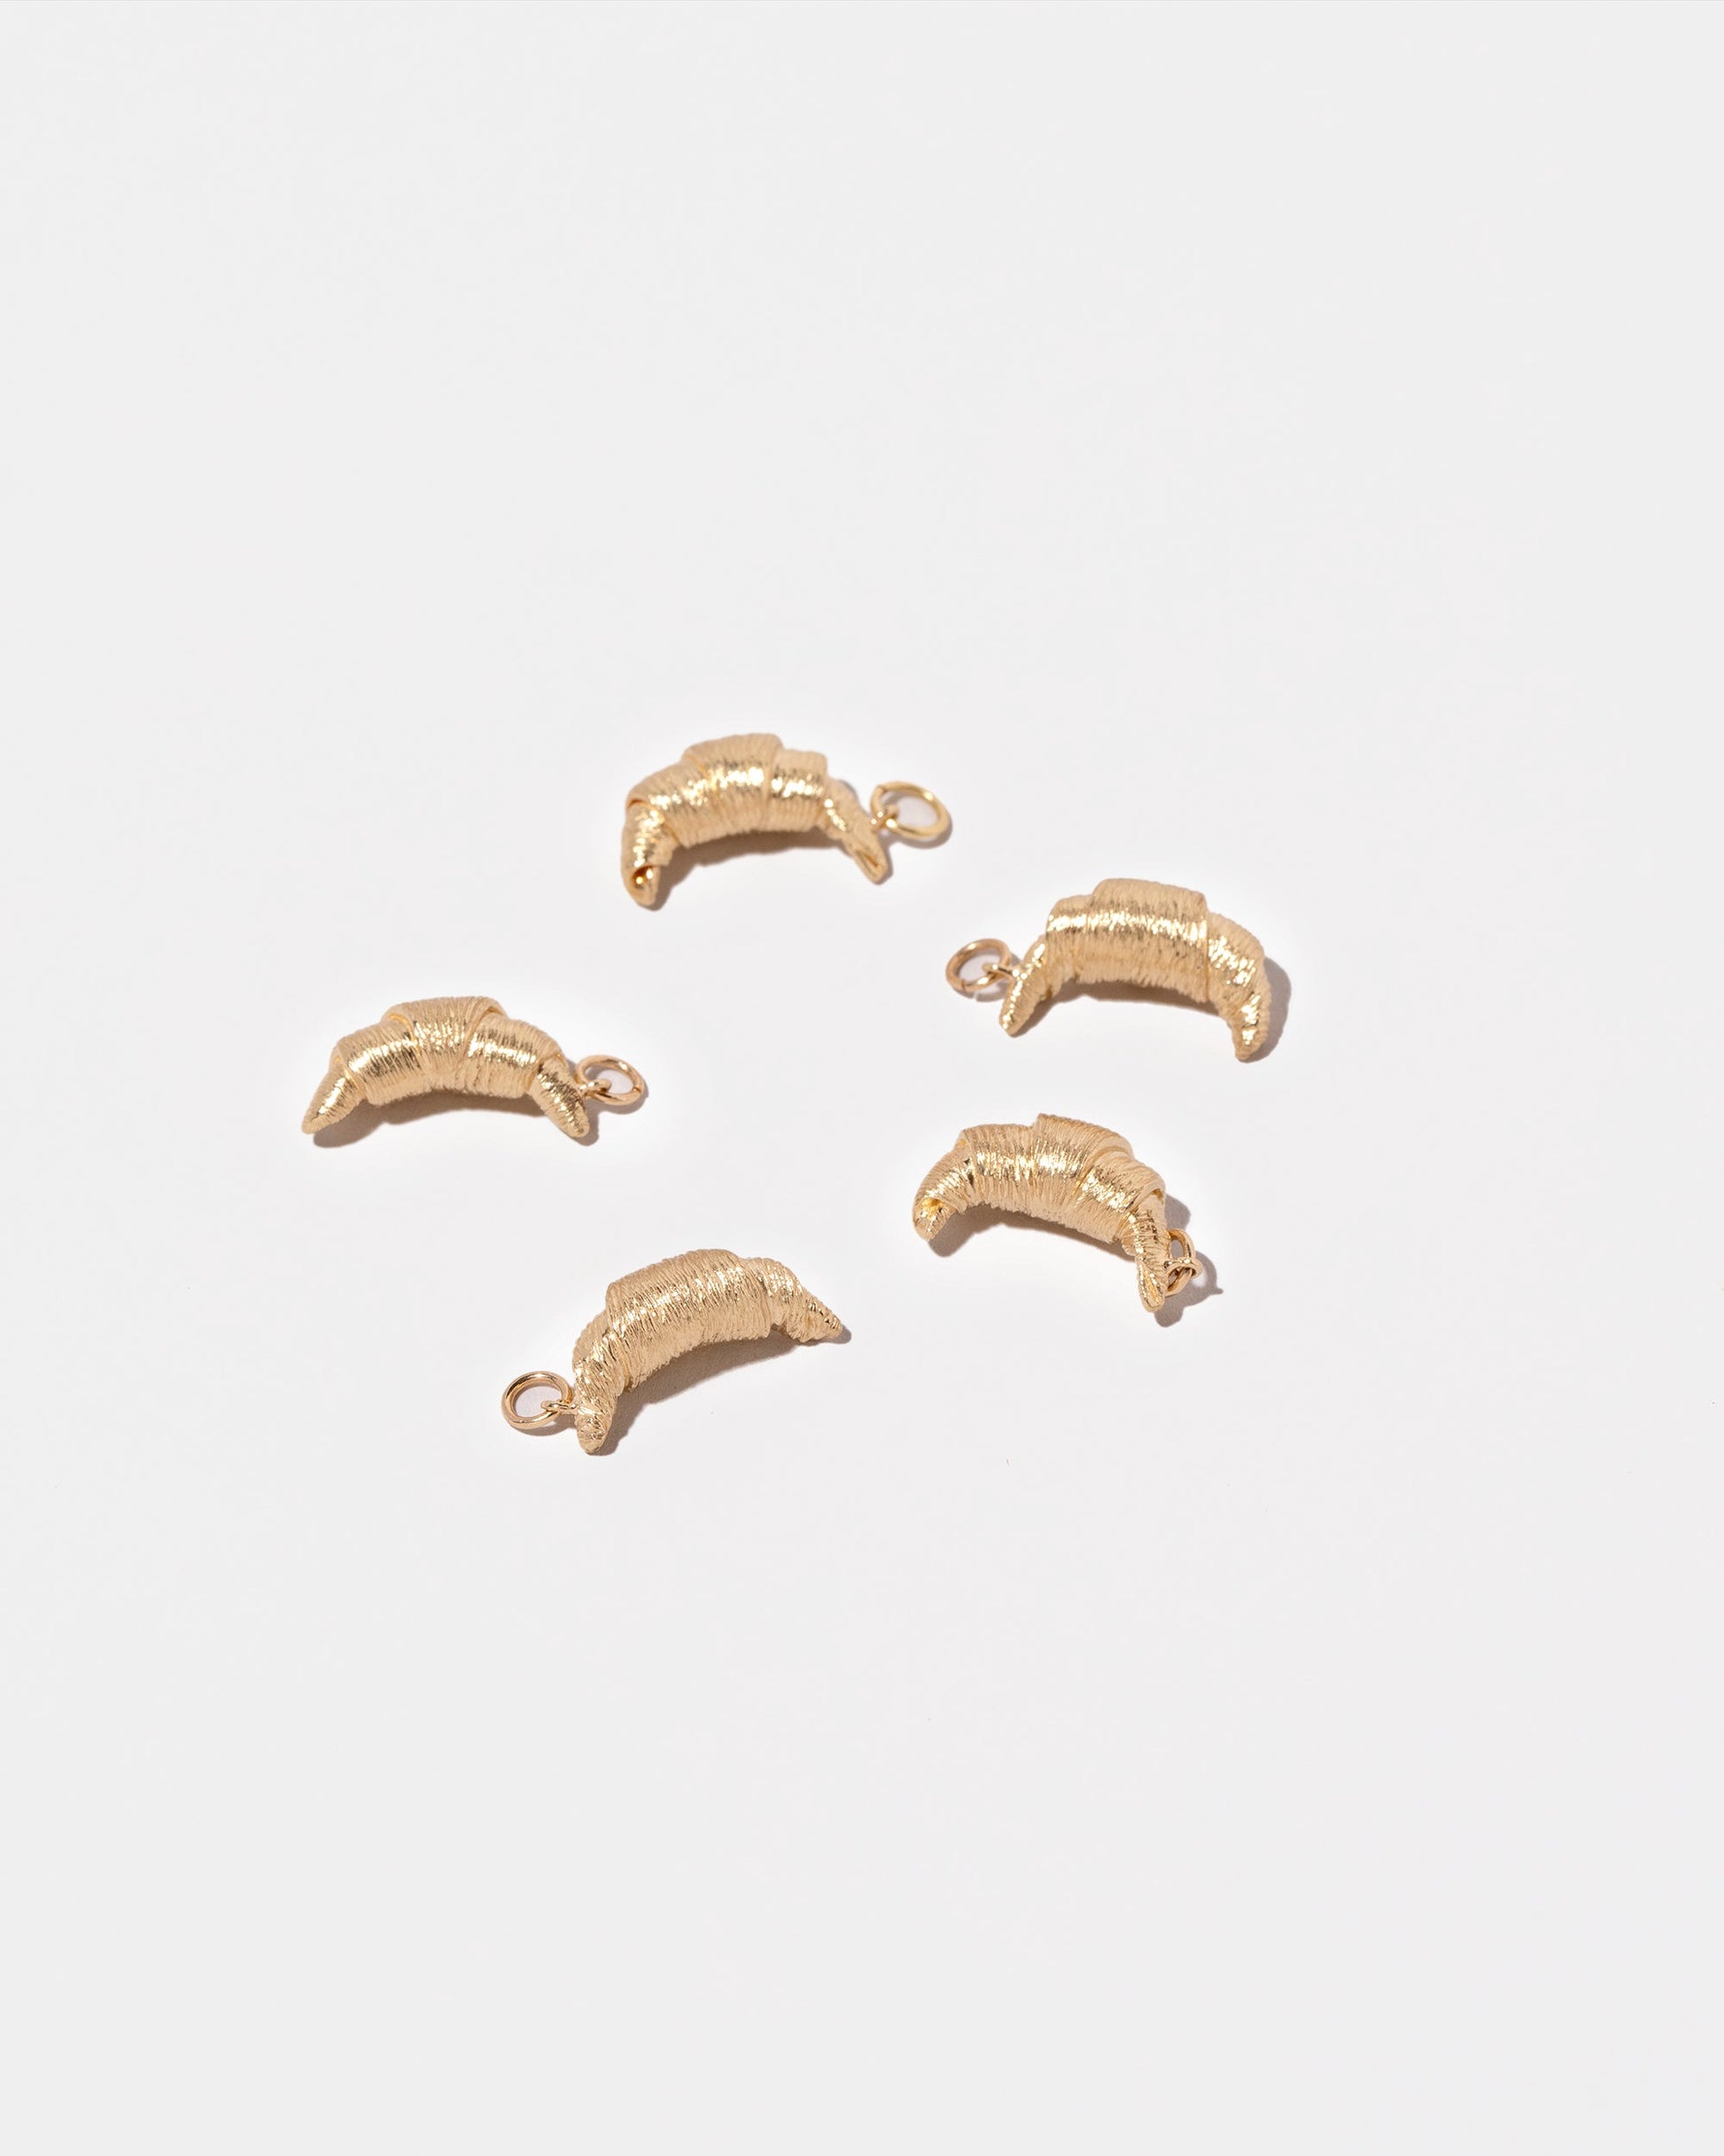 Group of Croissant Charms on light color background.